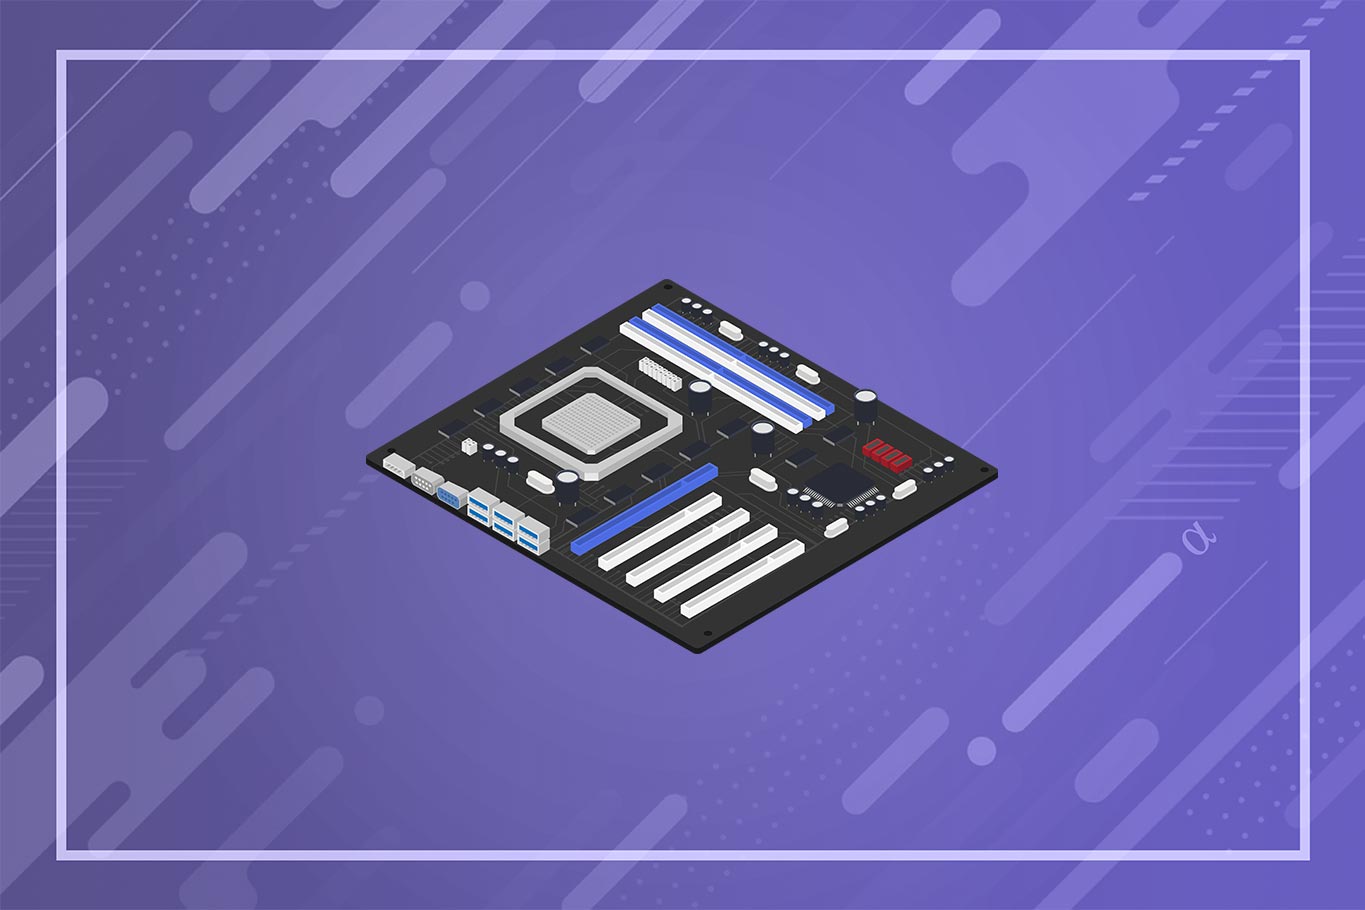 Best Micro ATX Motherboards